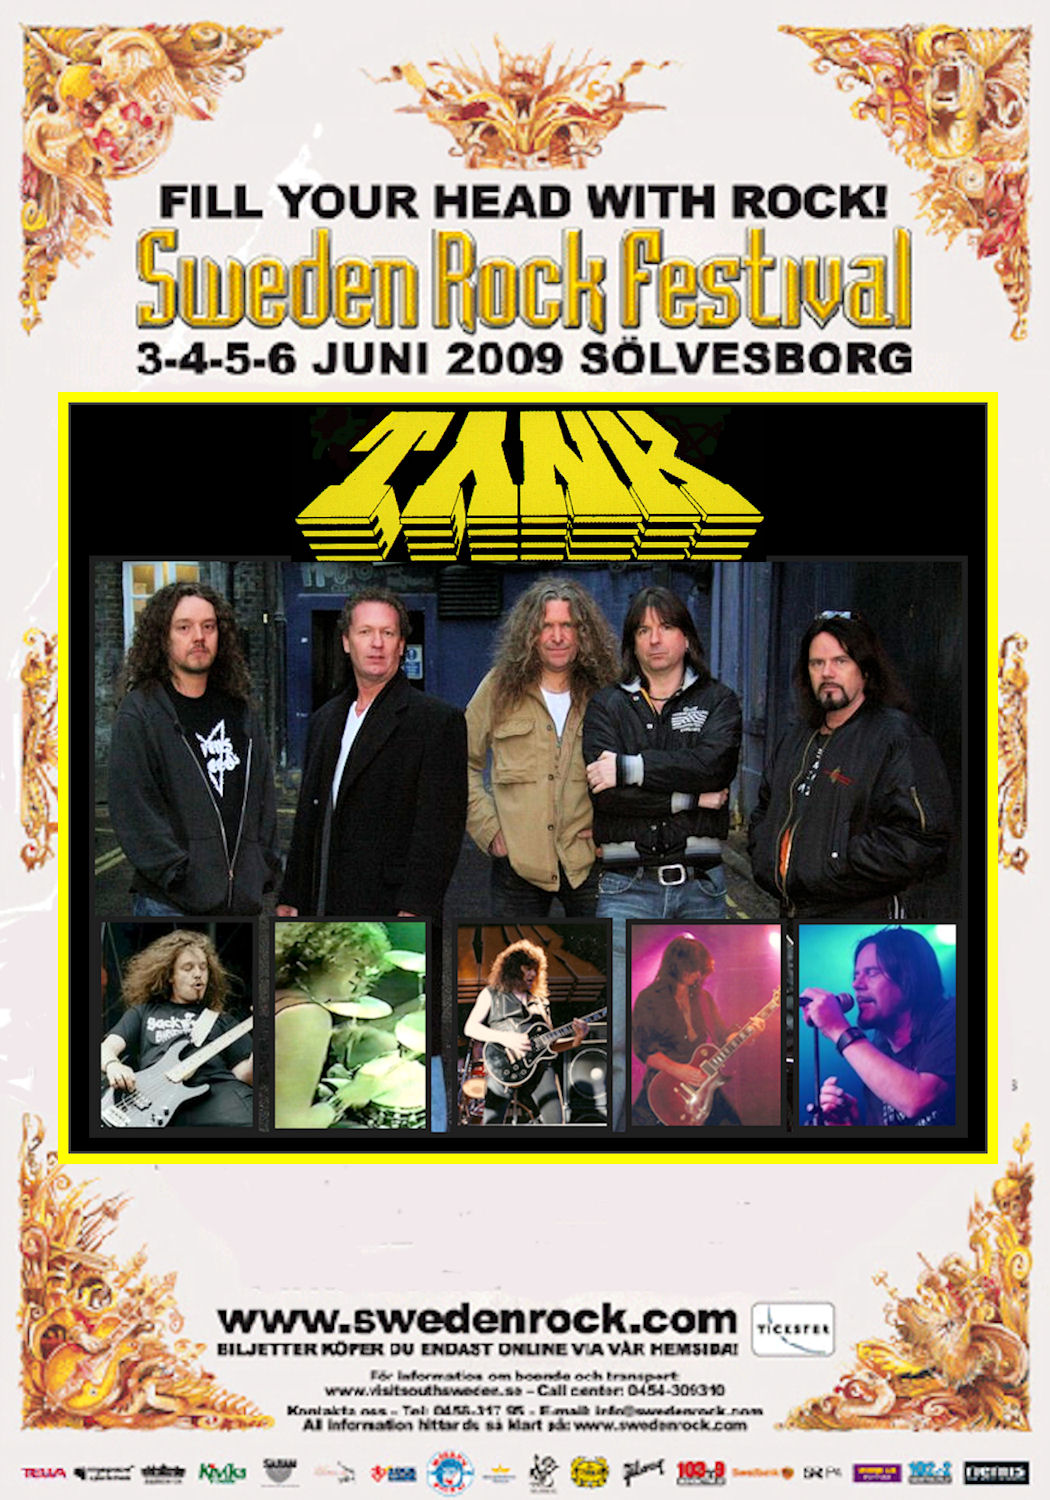 Doogie White and Tank at Sweden Rock